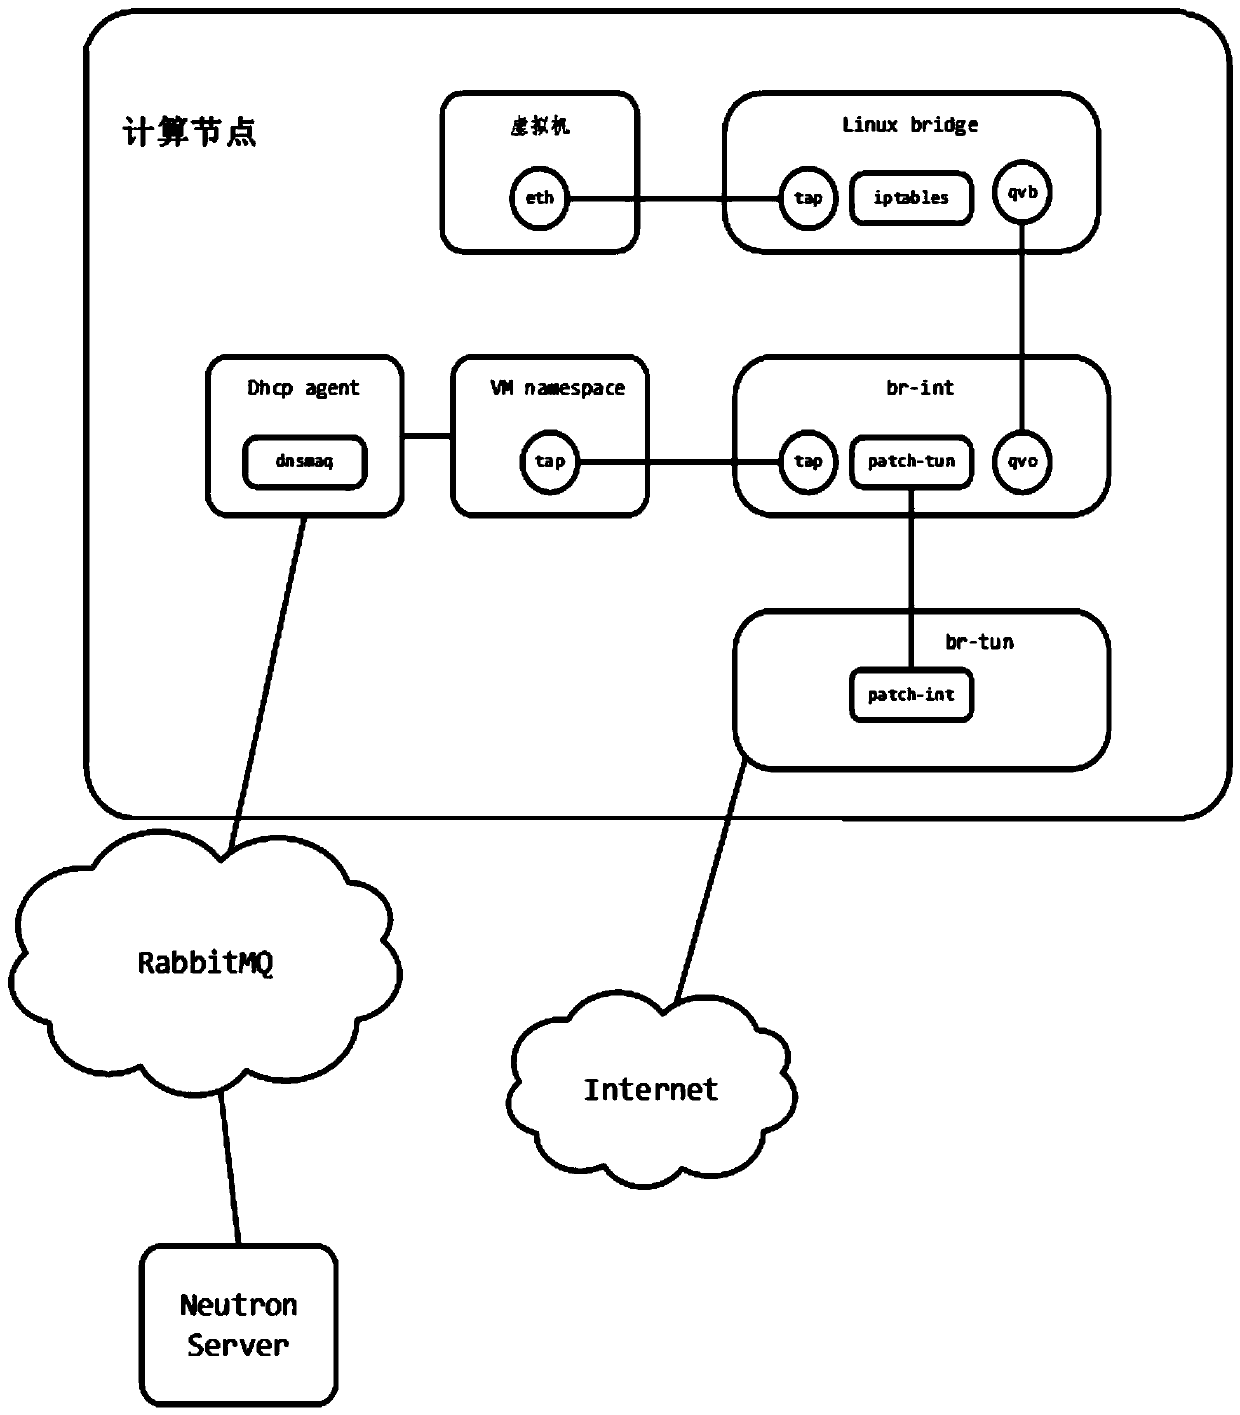 Implementation method of openstack full-distributed dhcp service